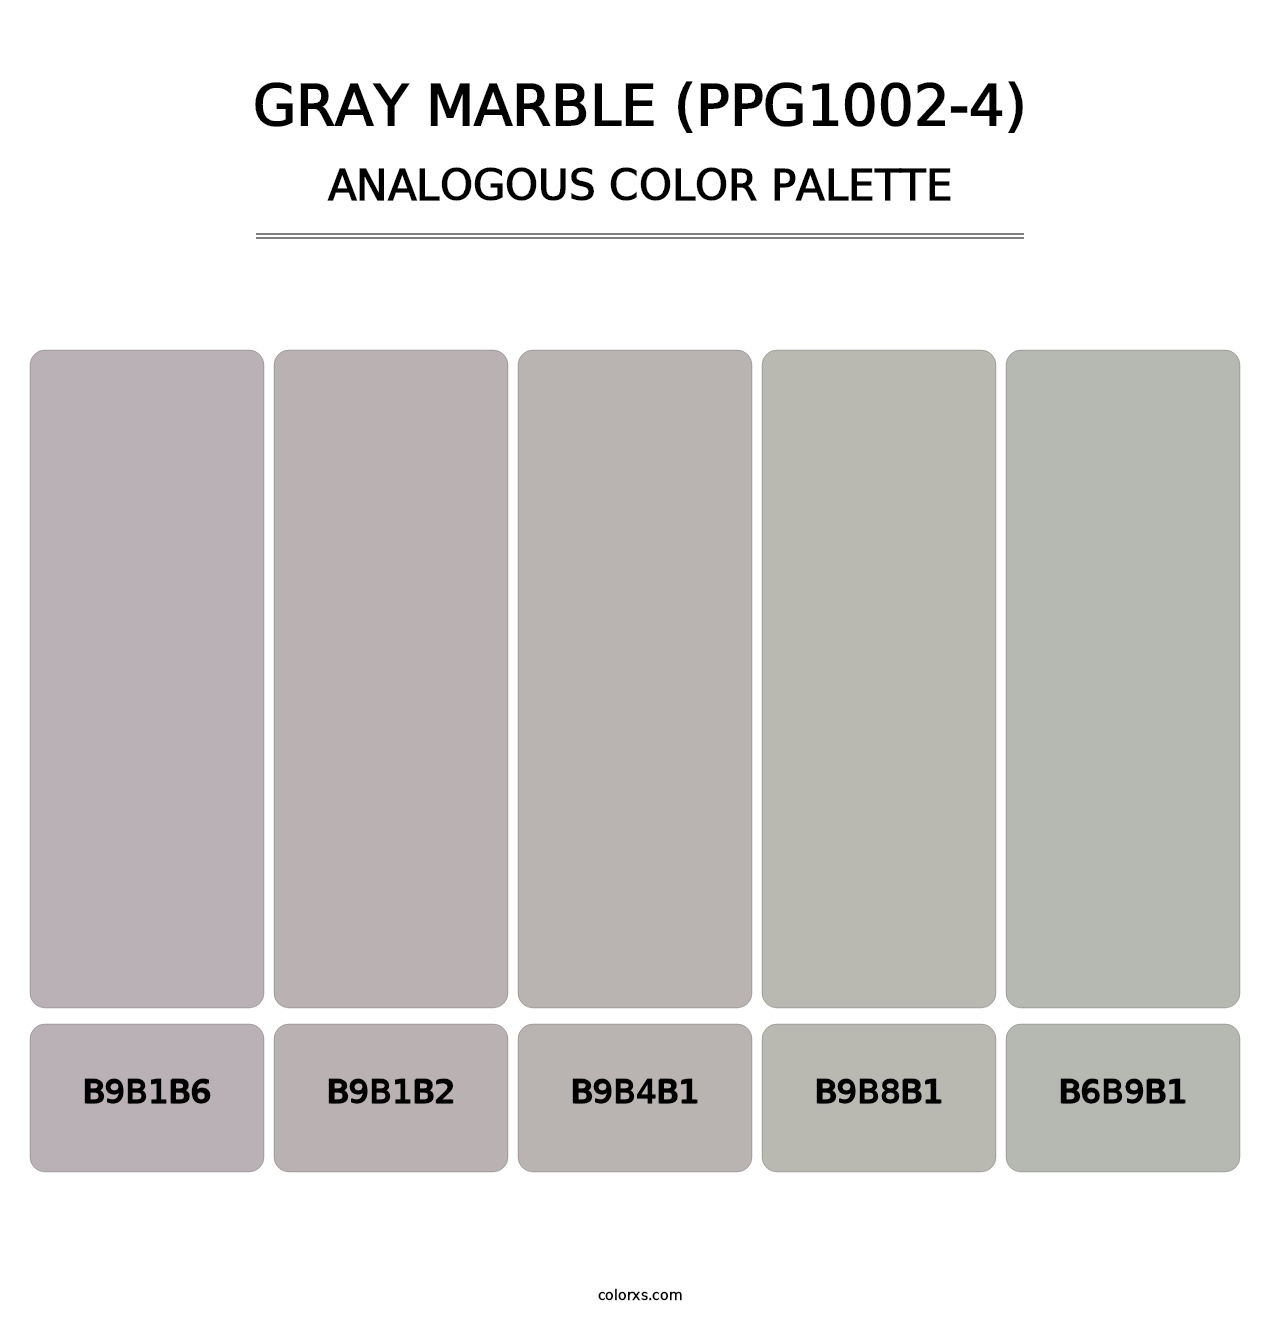 Gray Marble (PPG1002-4) - Analogous Color Palette